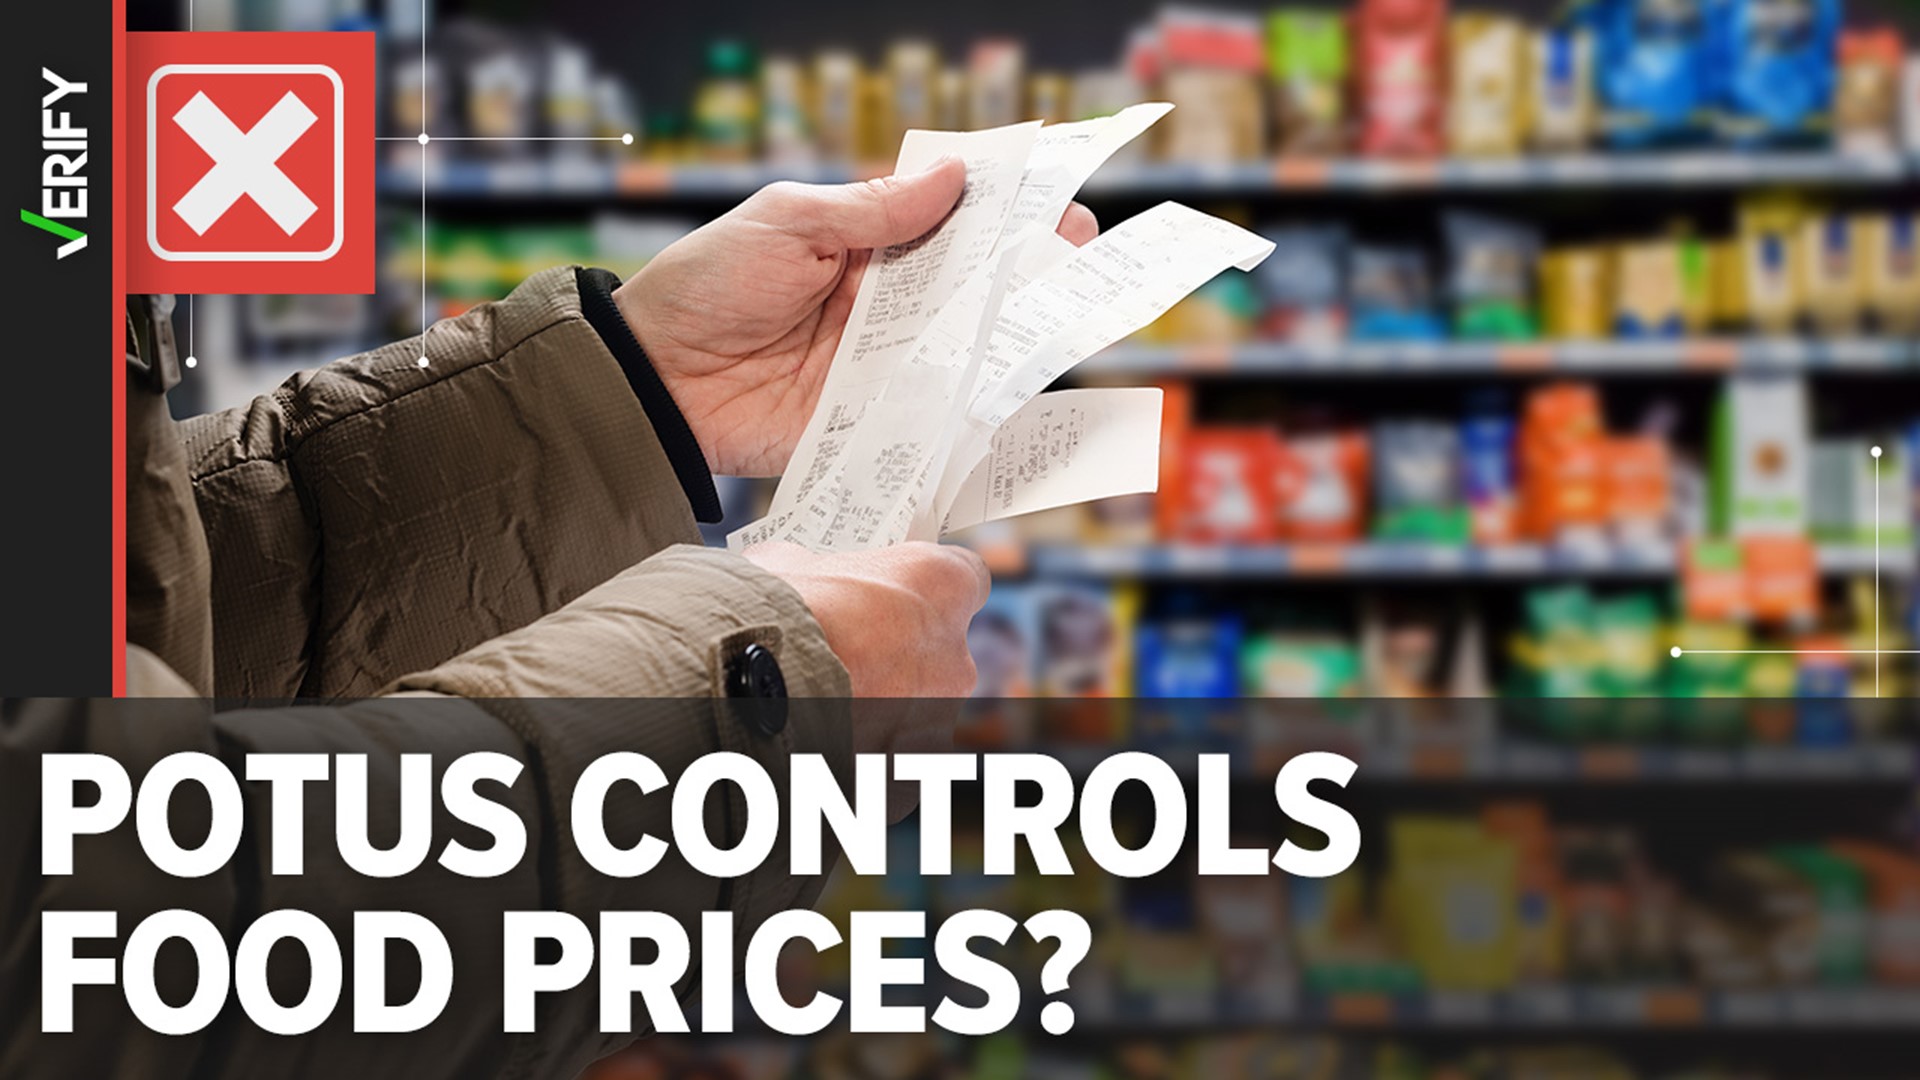 Grocery retailers choose how much to charge for the food they sell and take into account economic factors, known as market forces, that affect prices.